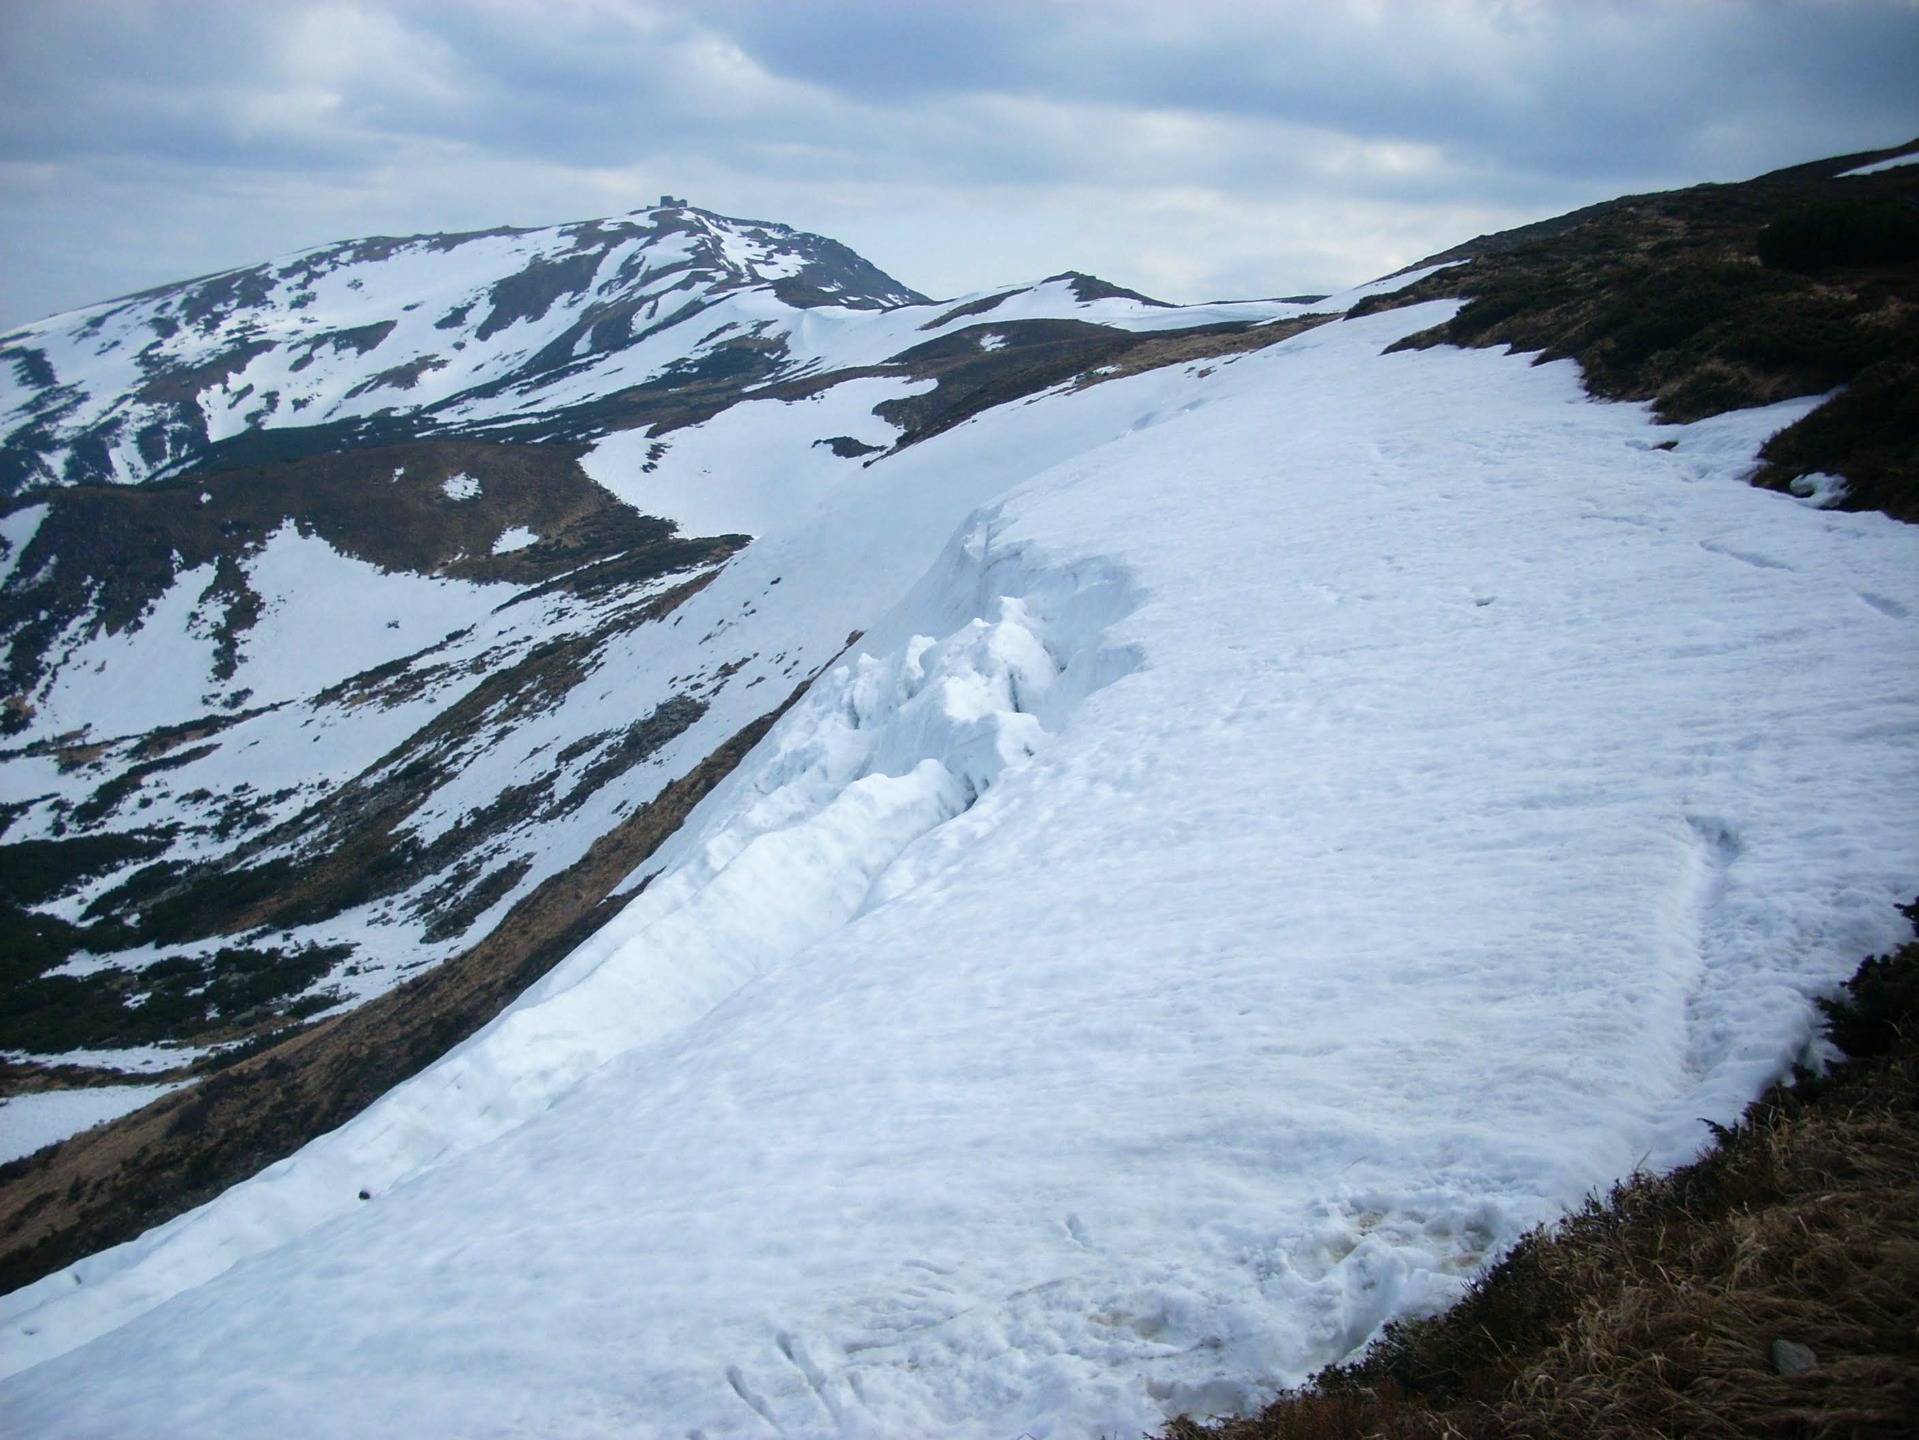 There is a lot of snow at the height even in May